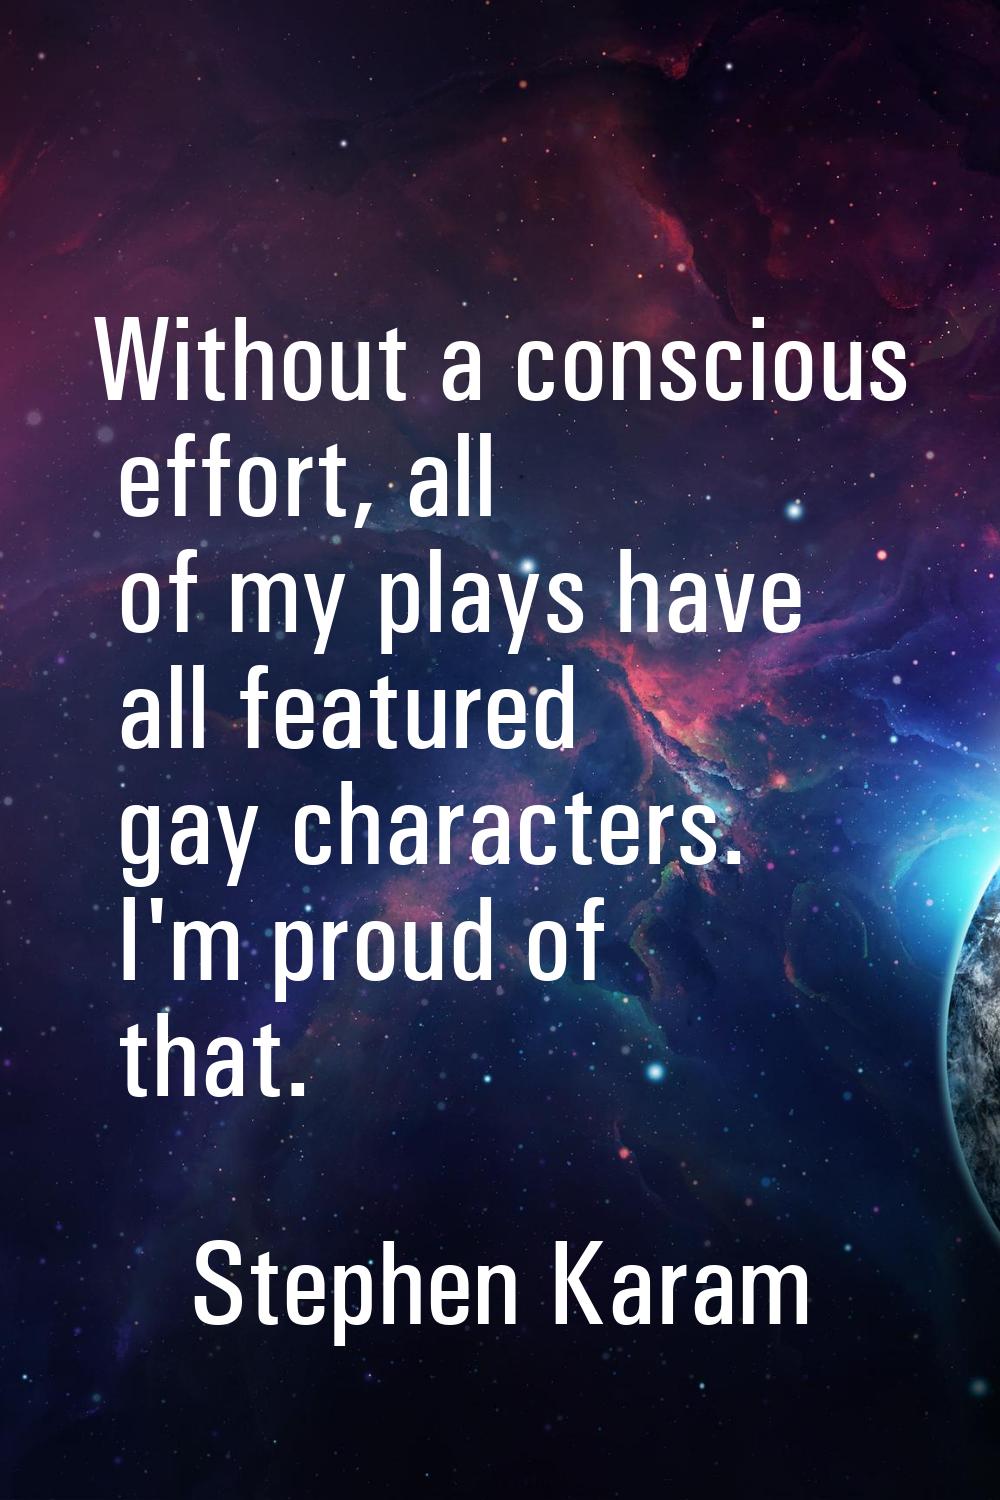 Without a conscious effort, all of my plays have all featured gay characters. I'm proud of that.